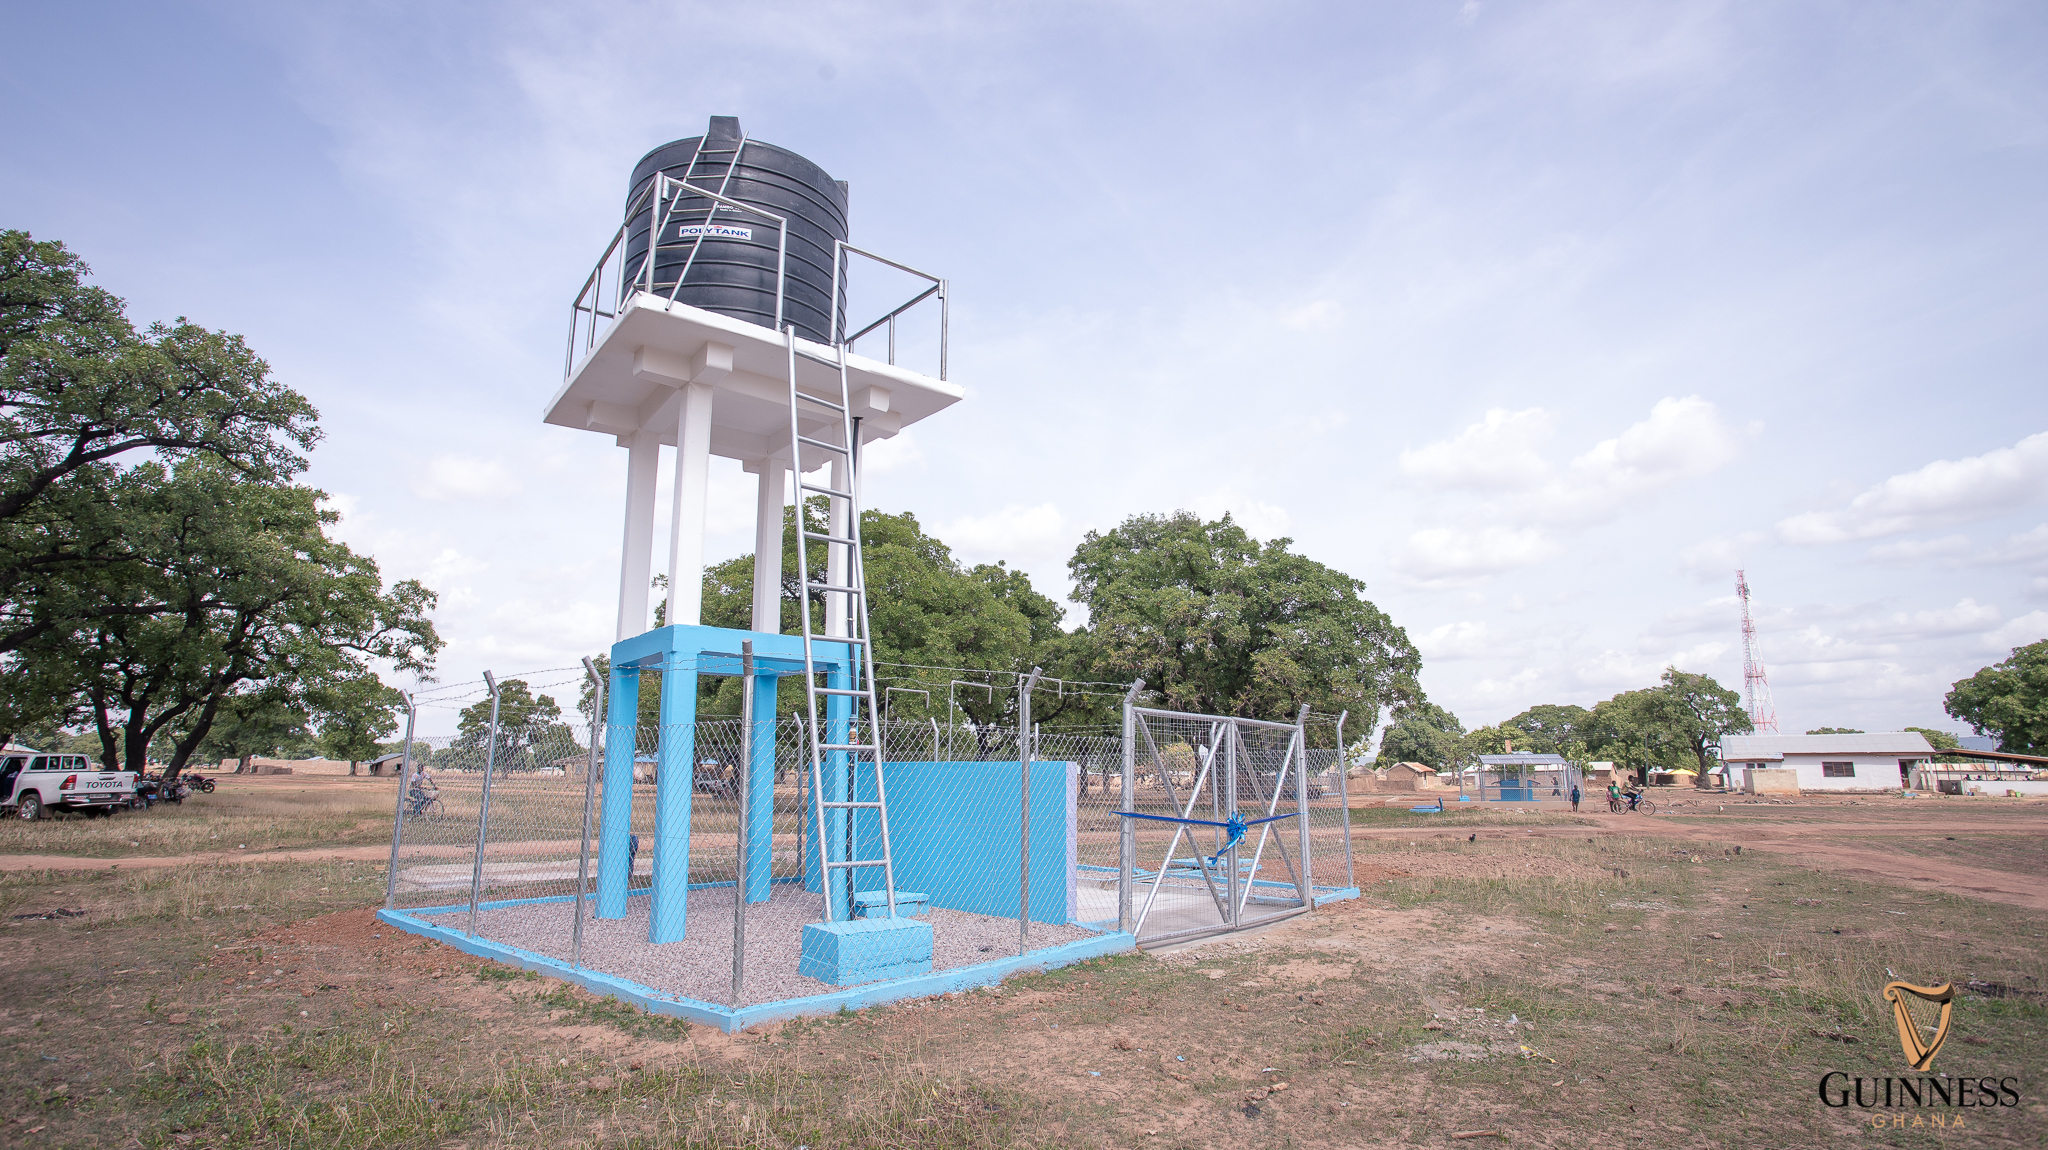 Guinness Ghana commissions mechanised solar powered water facility for Denugu community